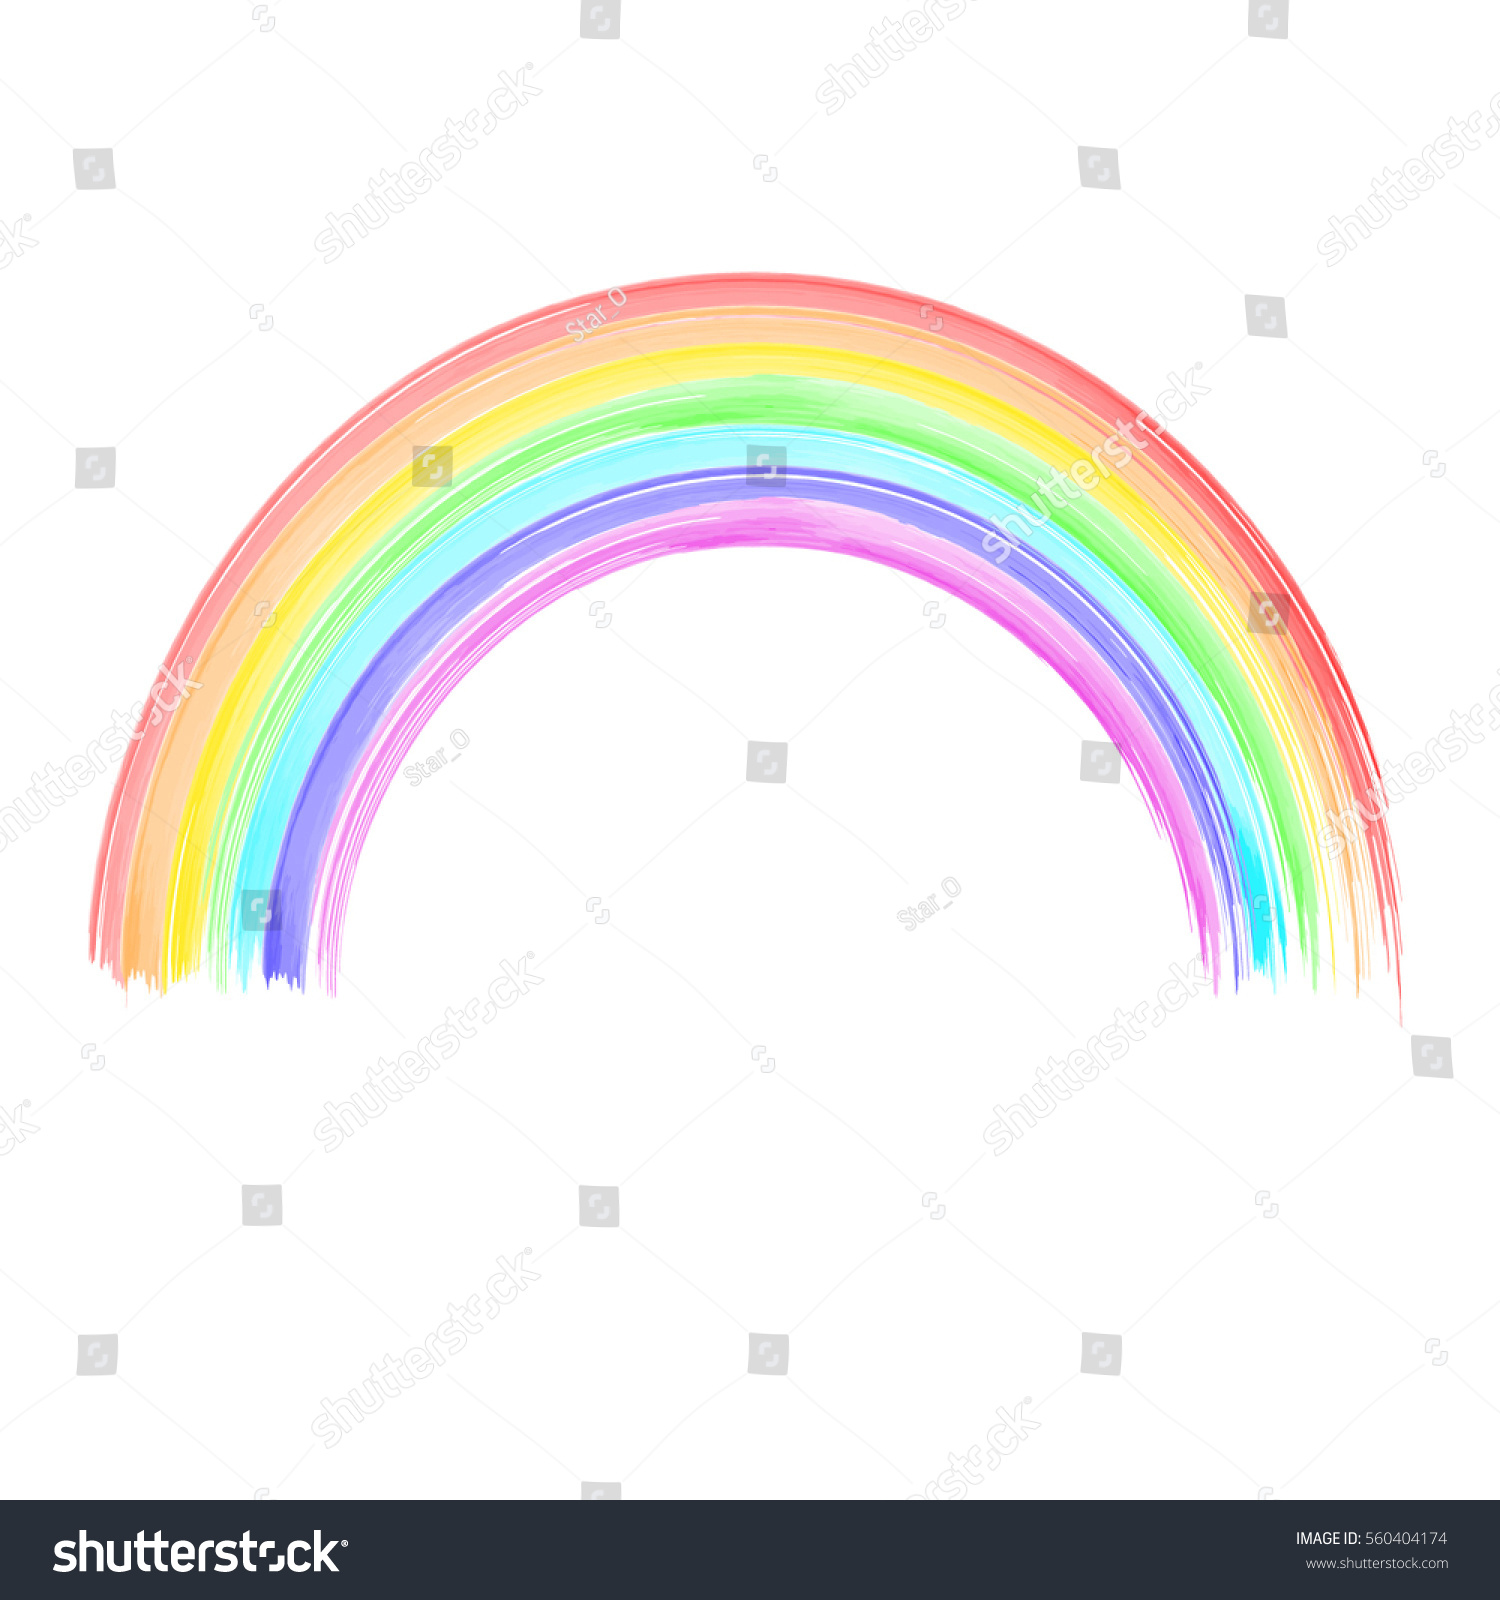 Download Watercolor Rainbow On White Background Watercolor Stock ...